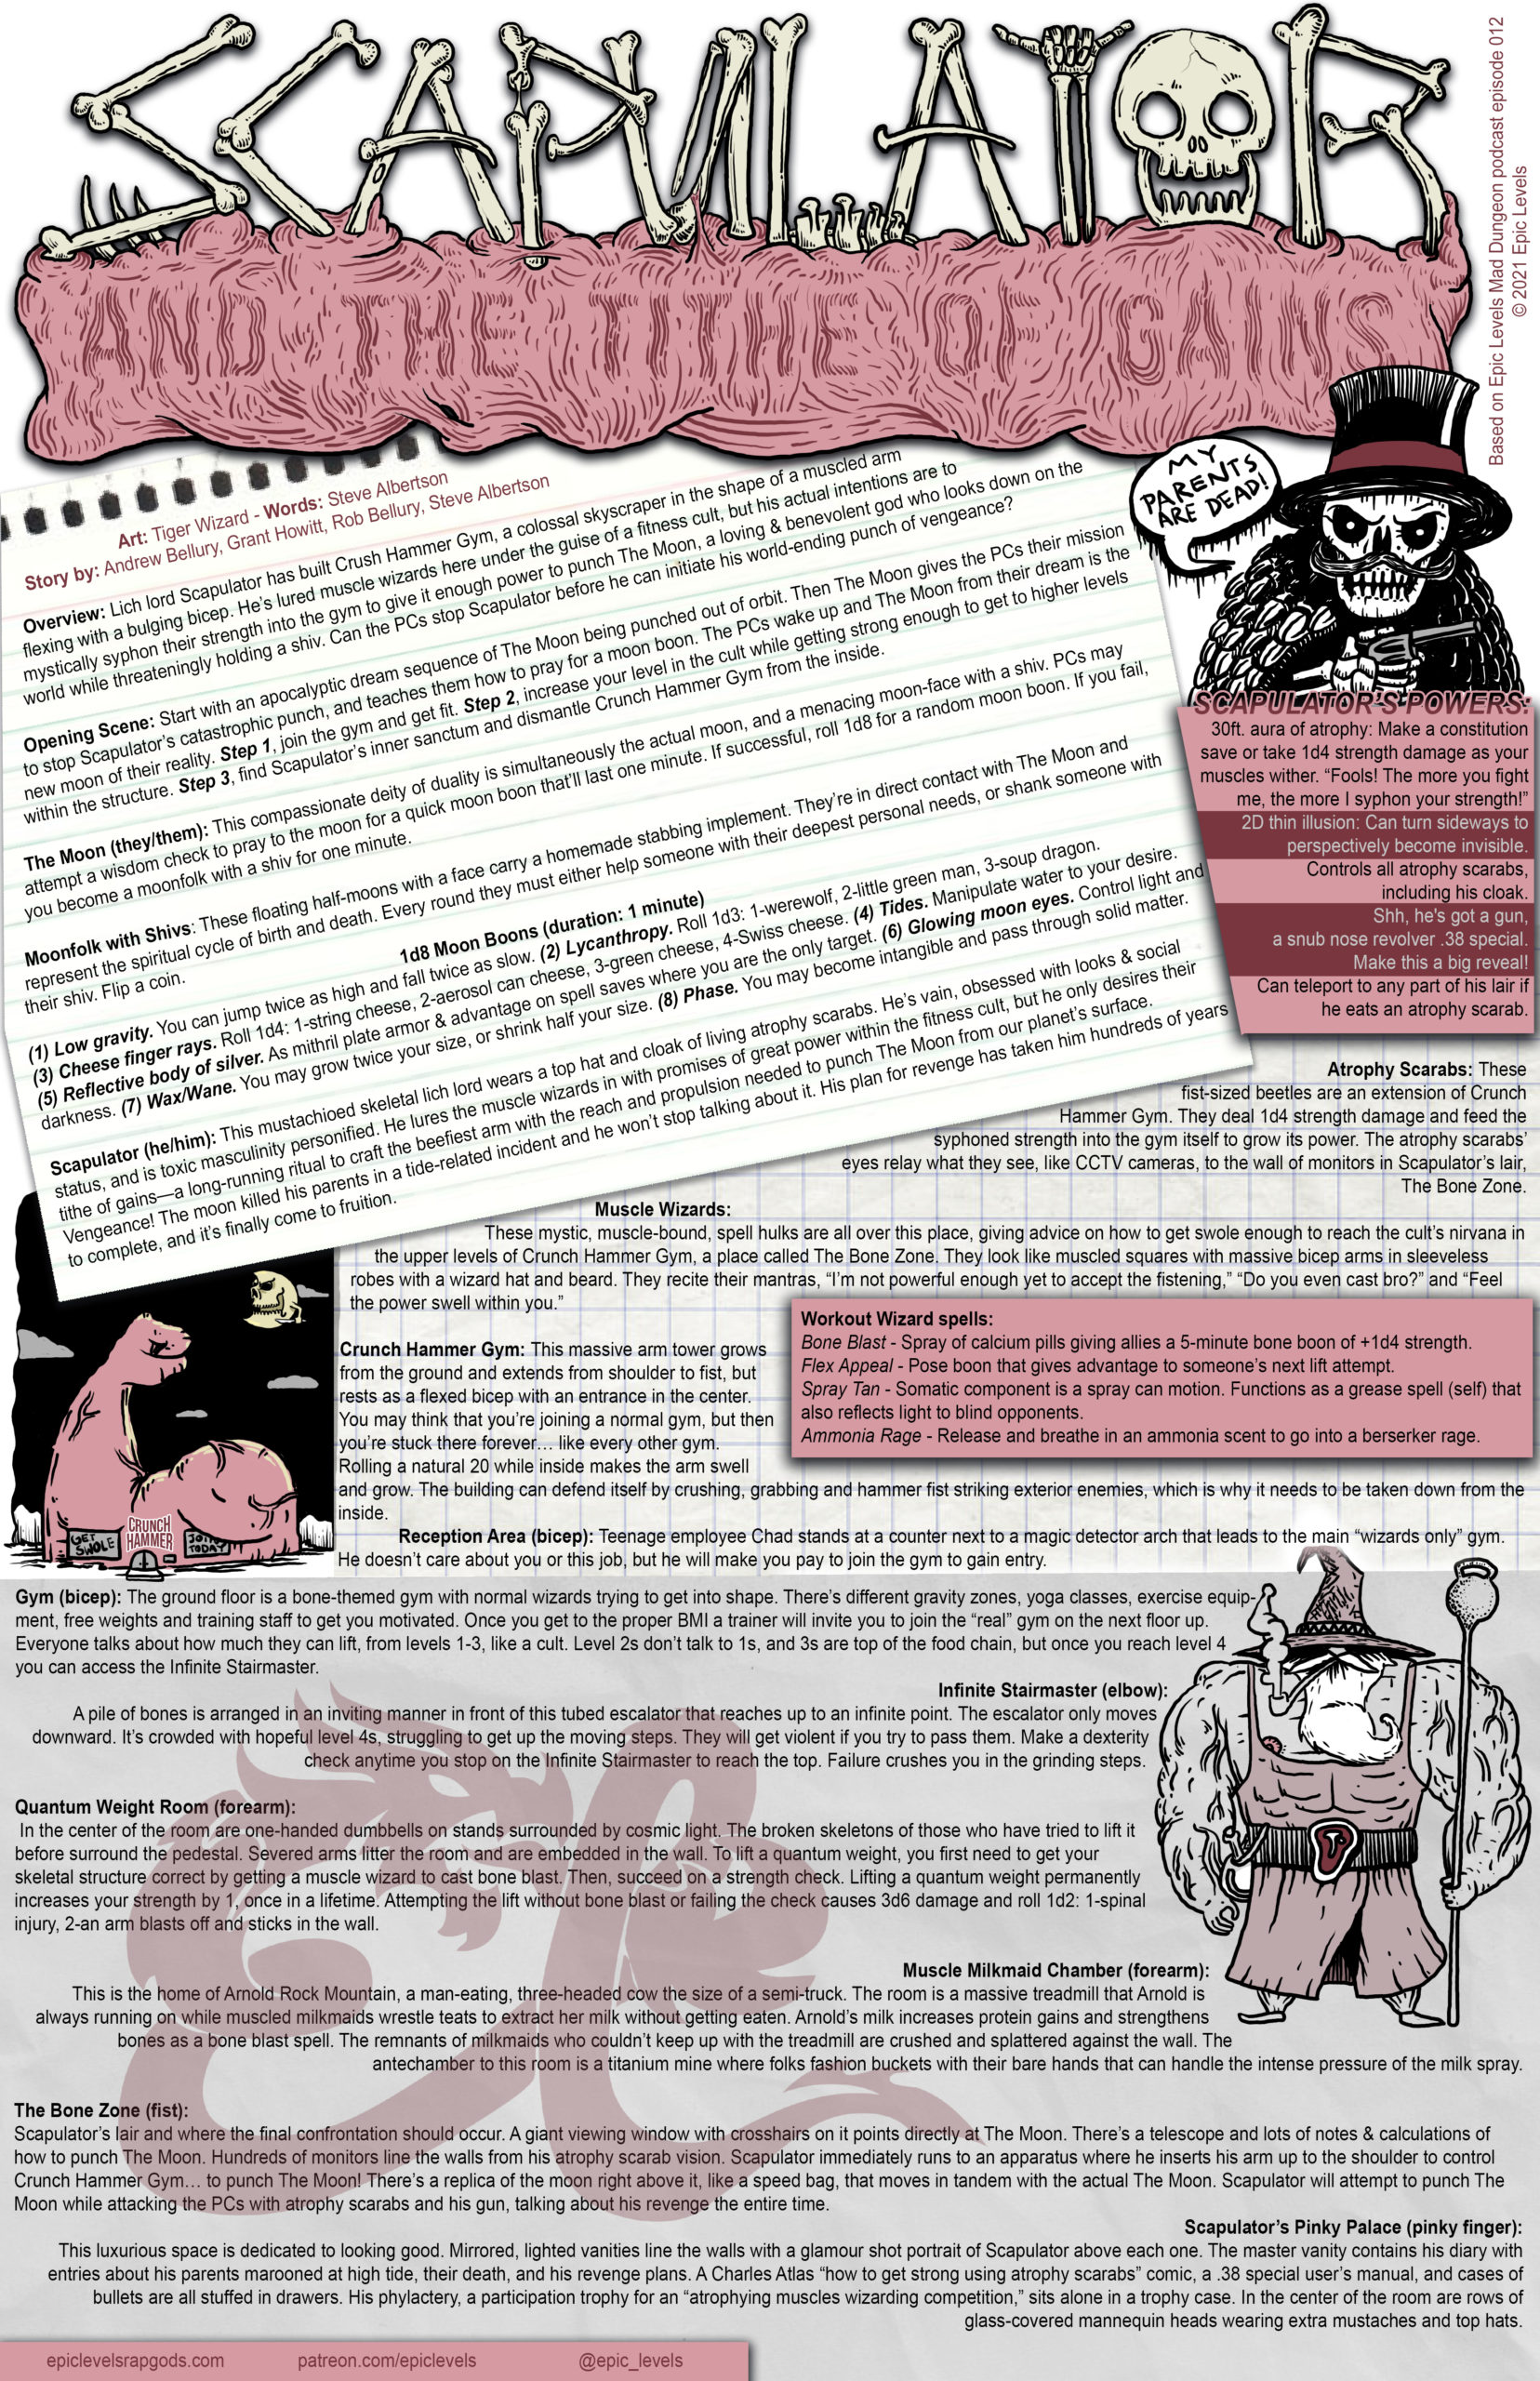 Epic Levels Mad Dungeon episode 12 Scapulator and the Tithe of Gains w/ Grant Howitt of Honey Heist, Spire, Heart one page dungeon adventure map poster